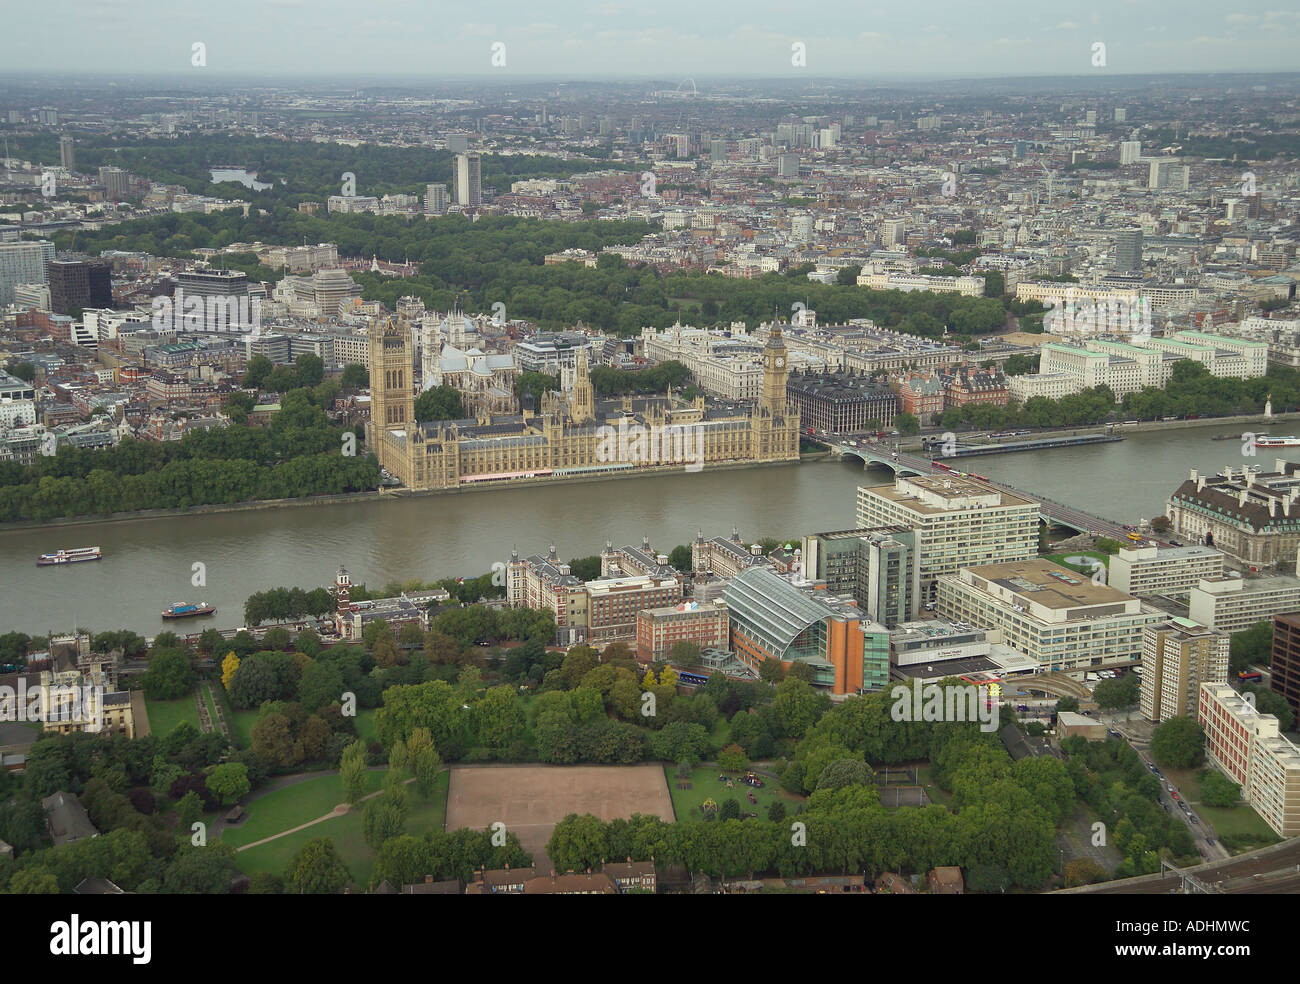 Aerial view of the Houses of Parliament and Whitehall looking over the River Thames and St Thomas' Hospital in London Stock Photo